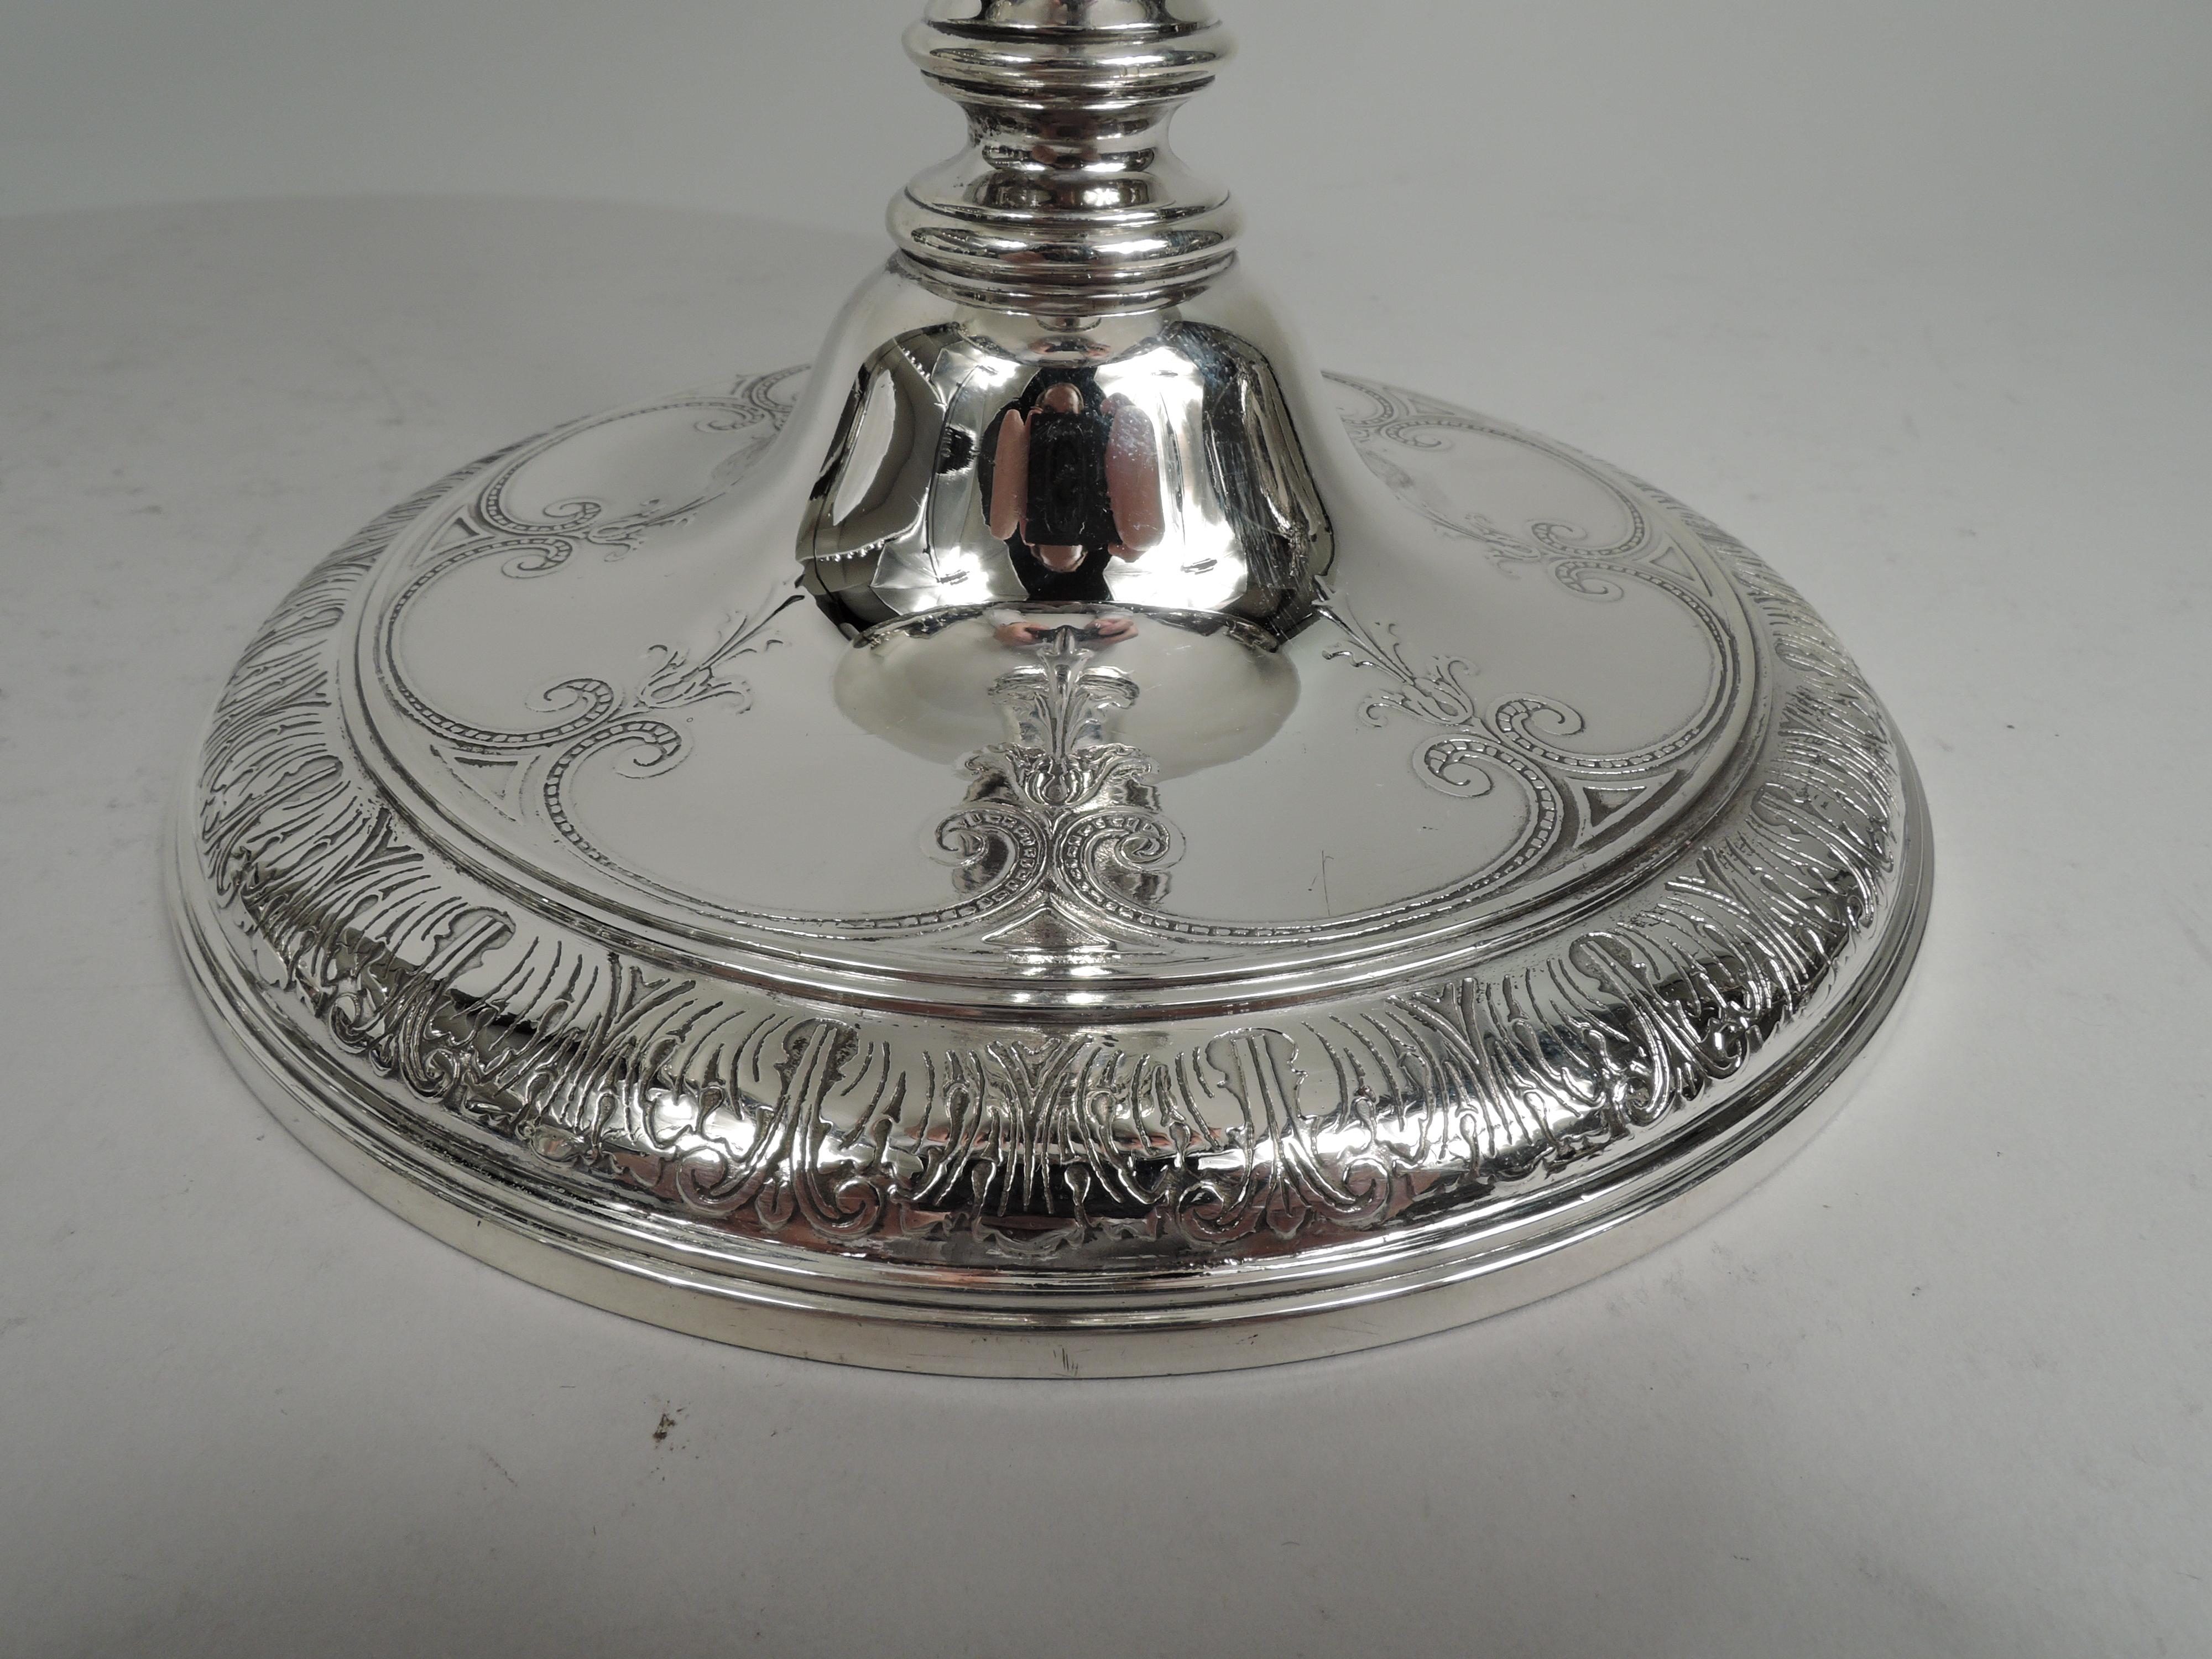 Antique Tiffany Aesthetic Sterling Silver Centerpiece Compote 1